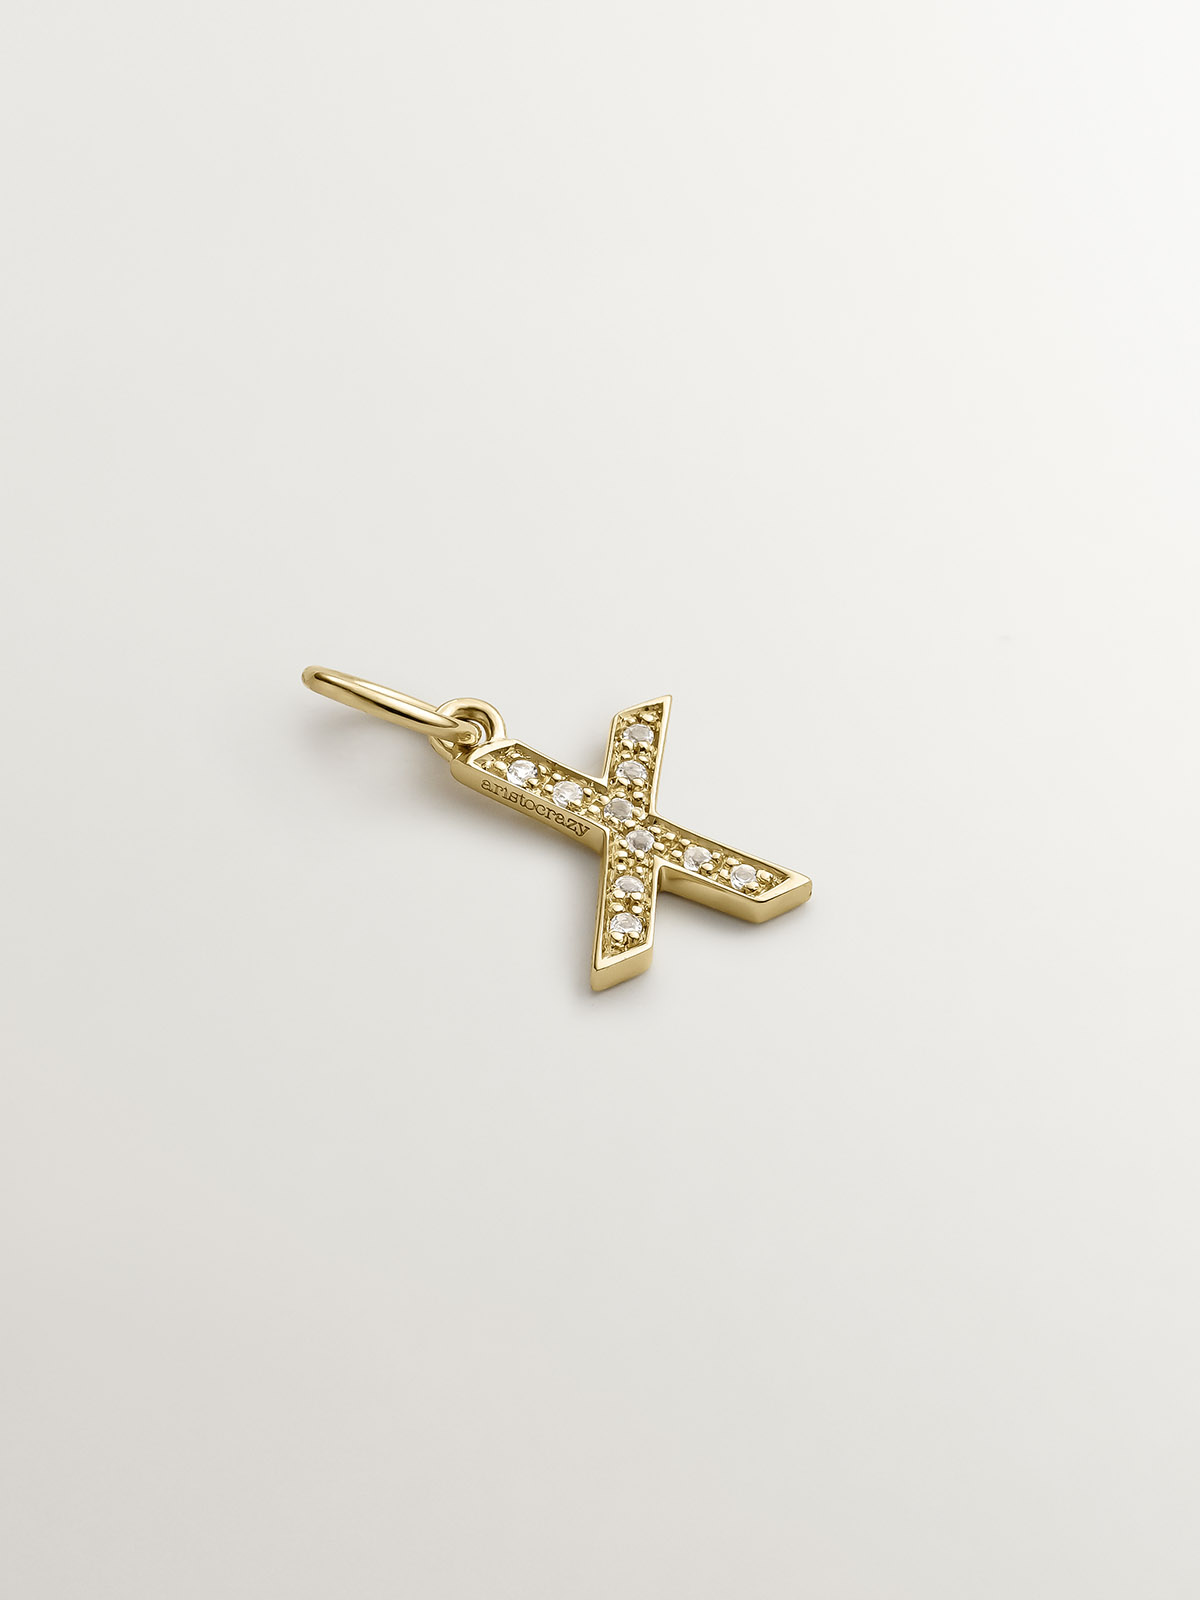 18K Yellow Gold Plated 925 Silver Charm with White Topaz Initial X